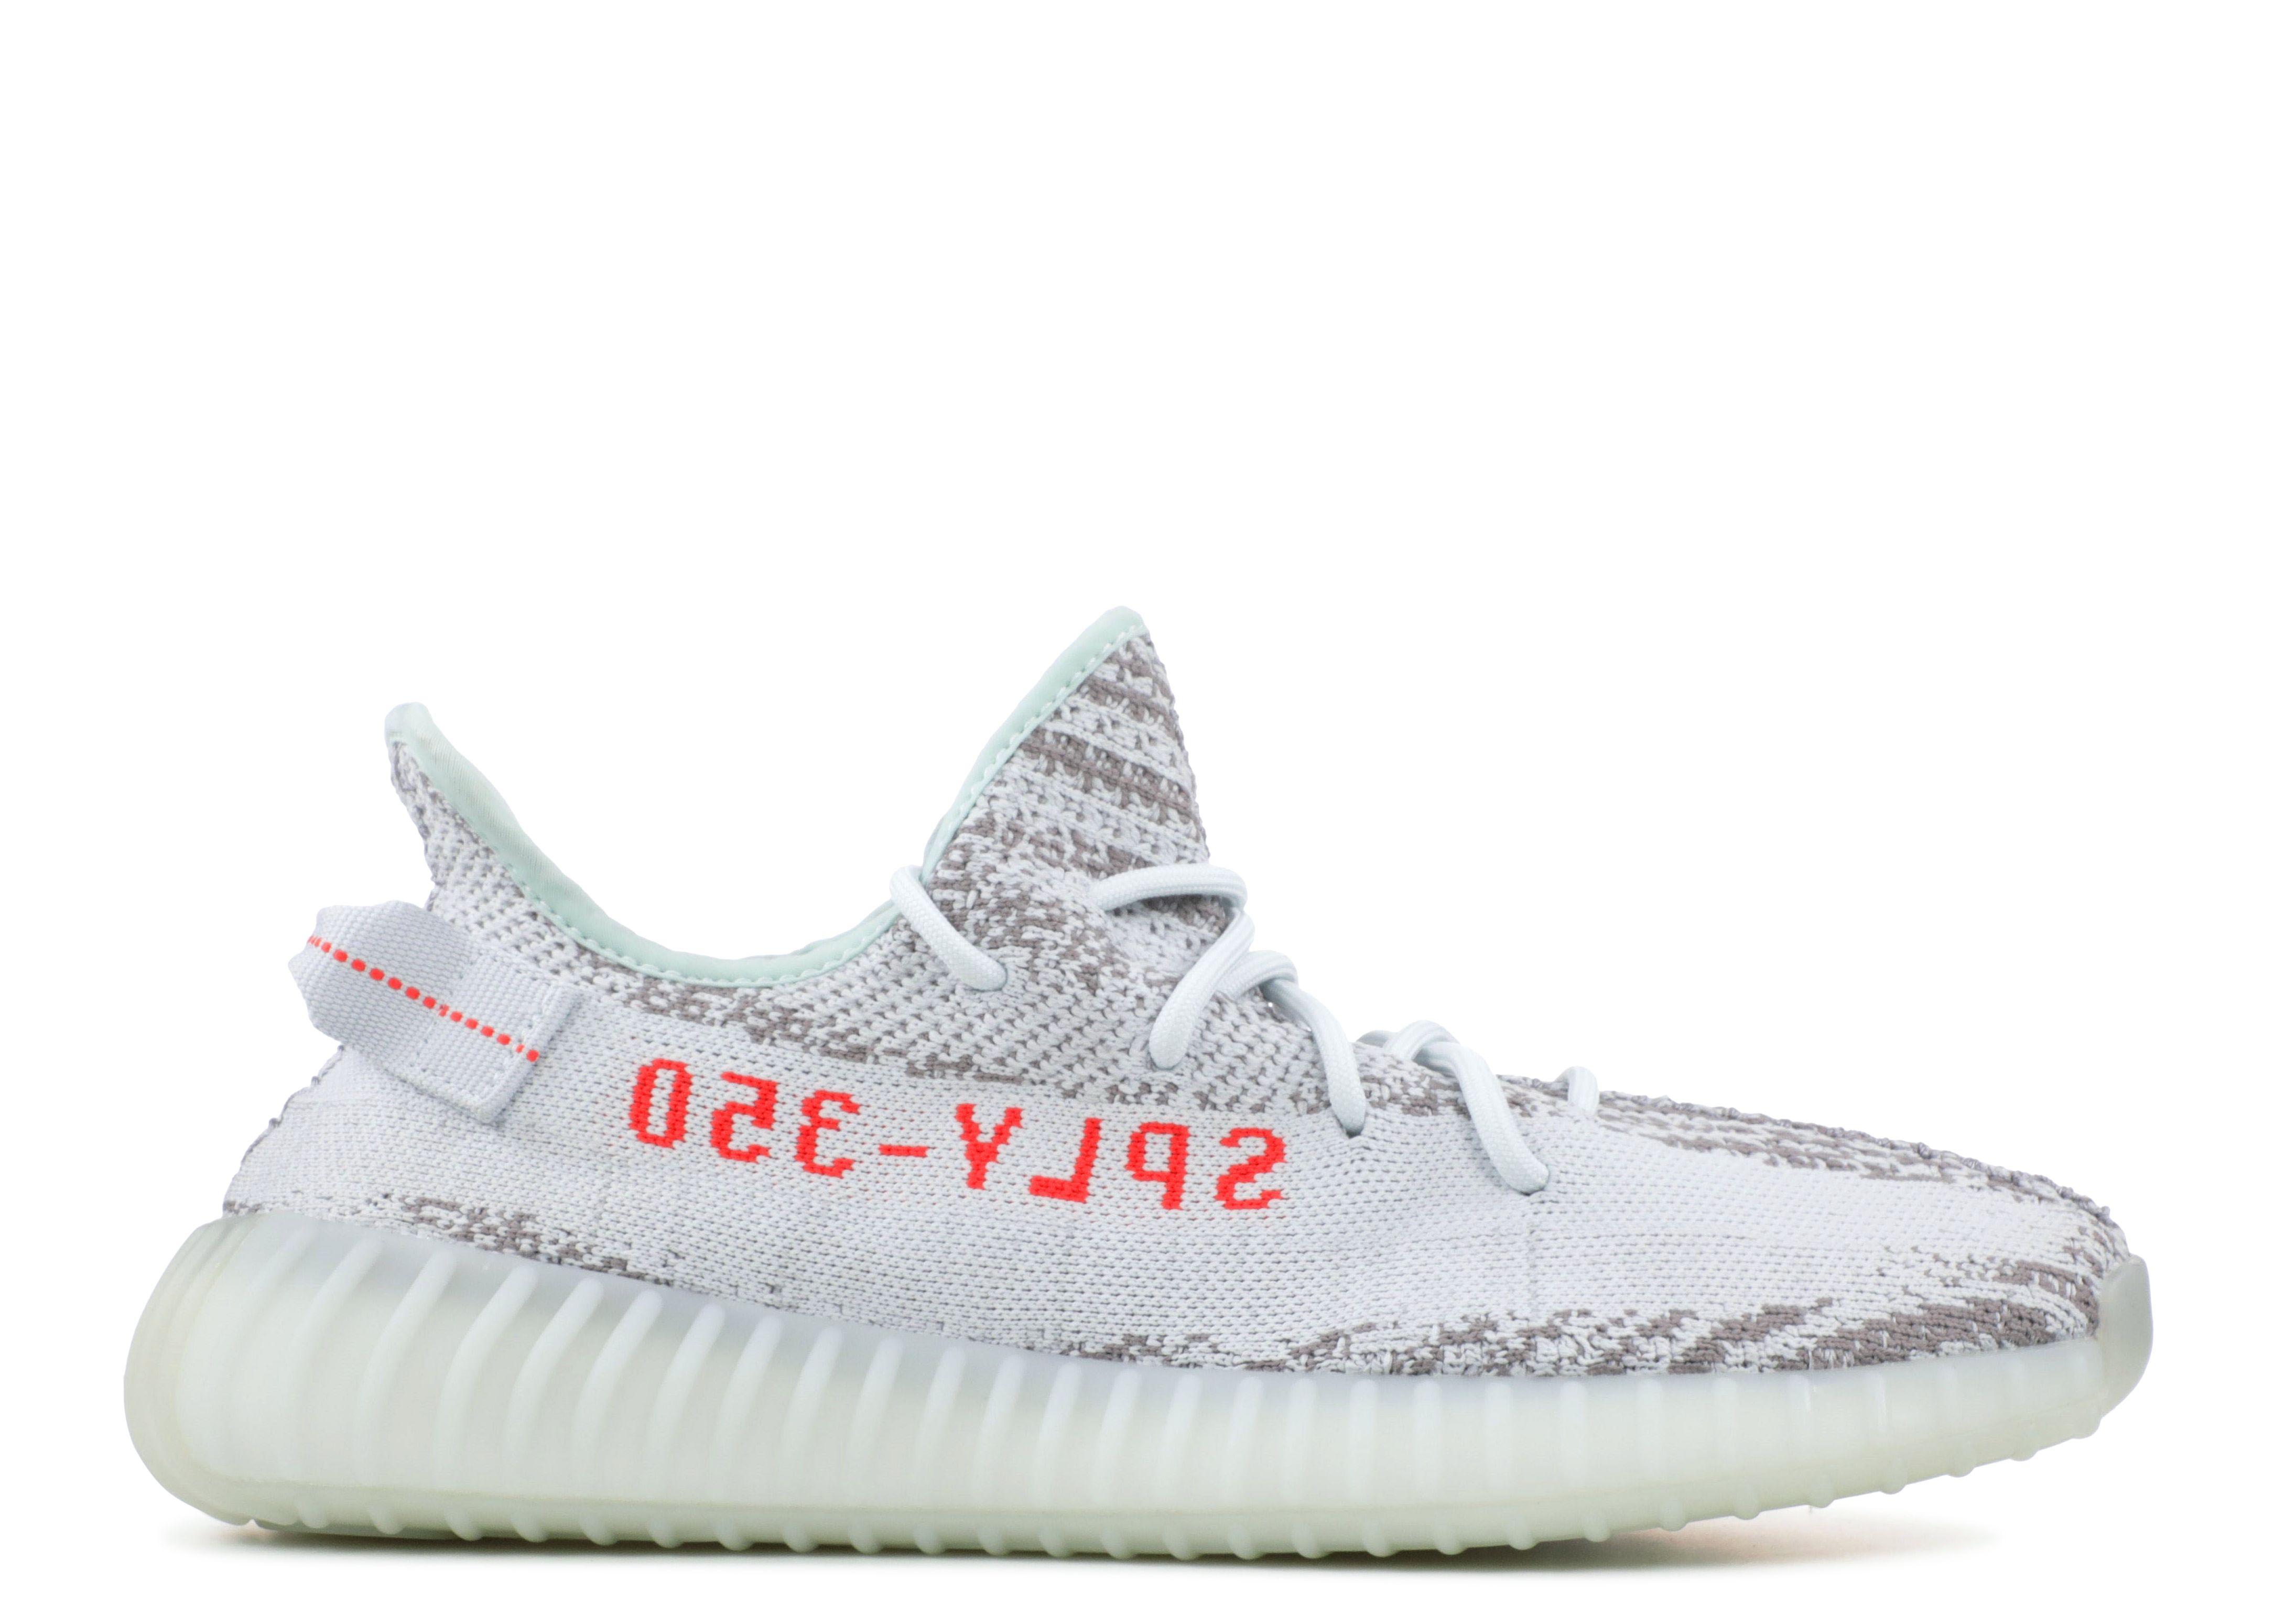 Greengrocer Actively amount of sales Adidas Yeezy Sneakers | Flight Club